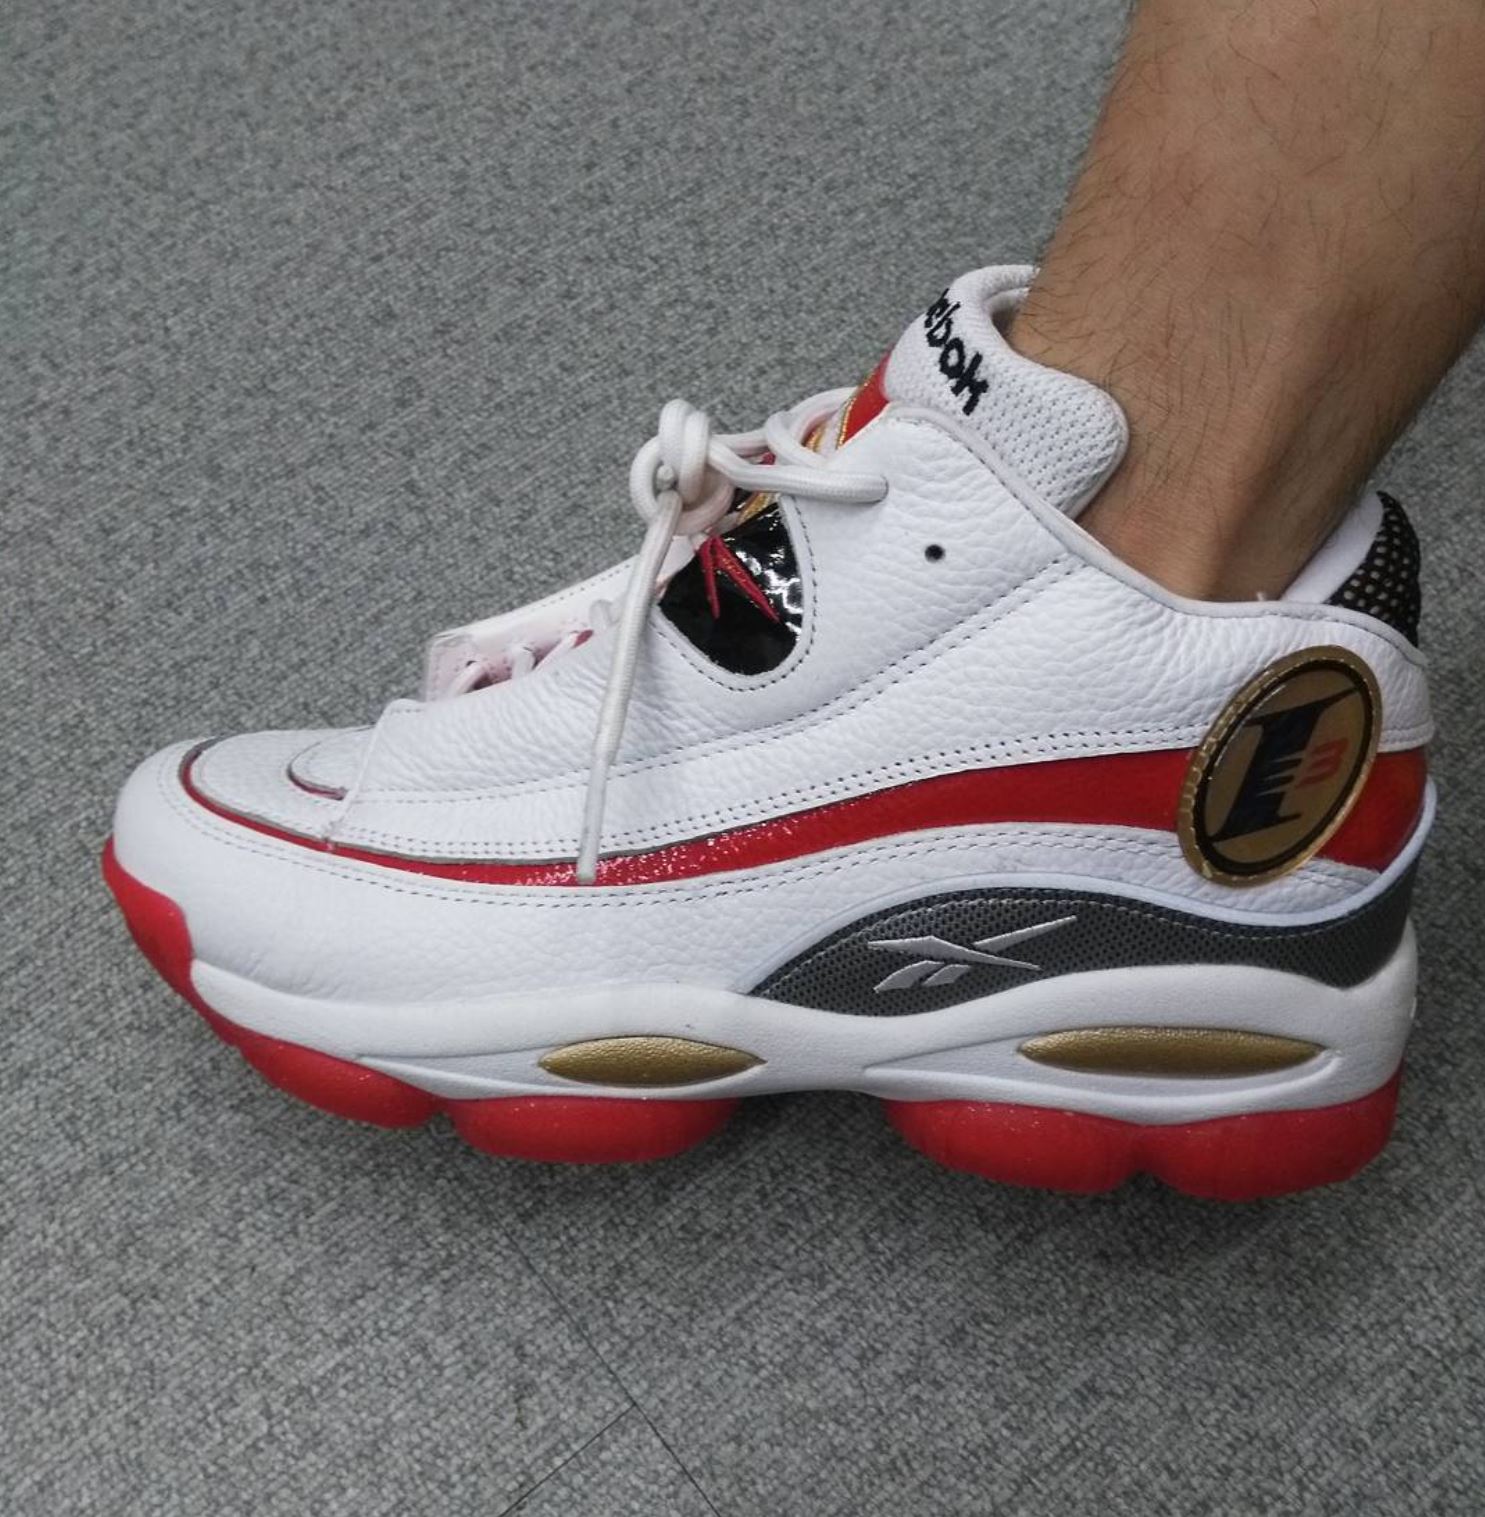 Reebok Classic The Answer 1 Dmx Allen Iverson Og White Red